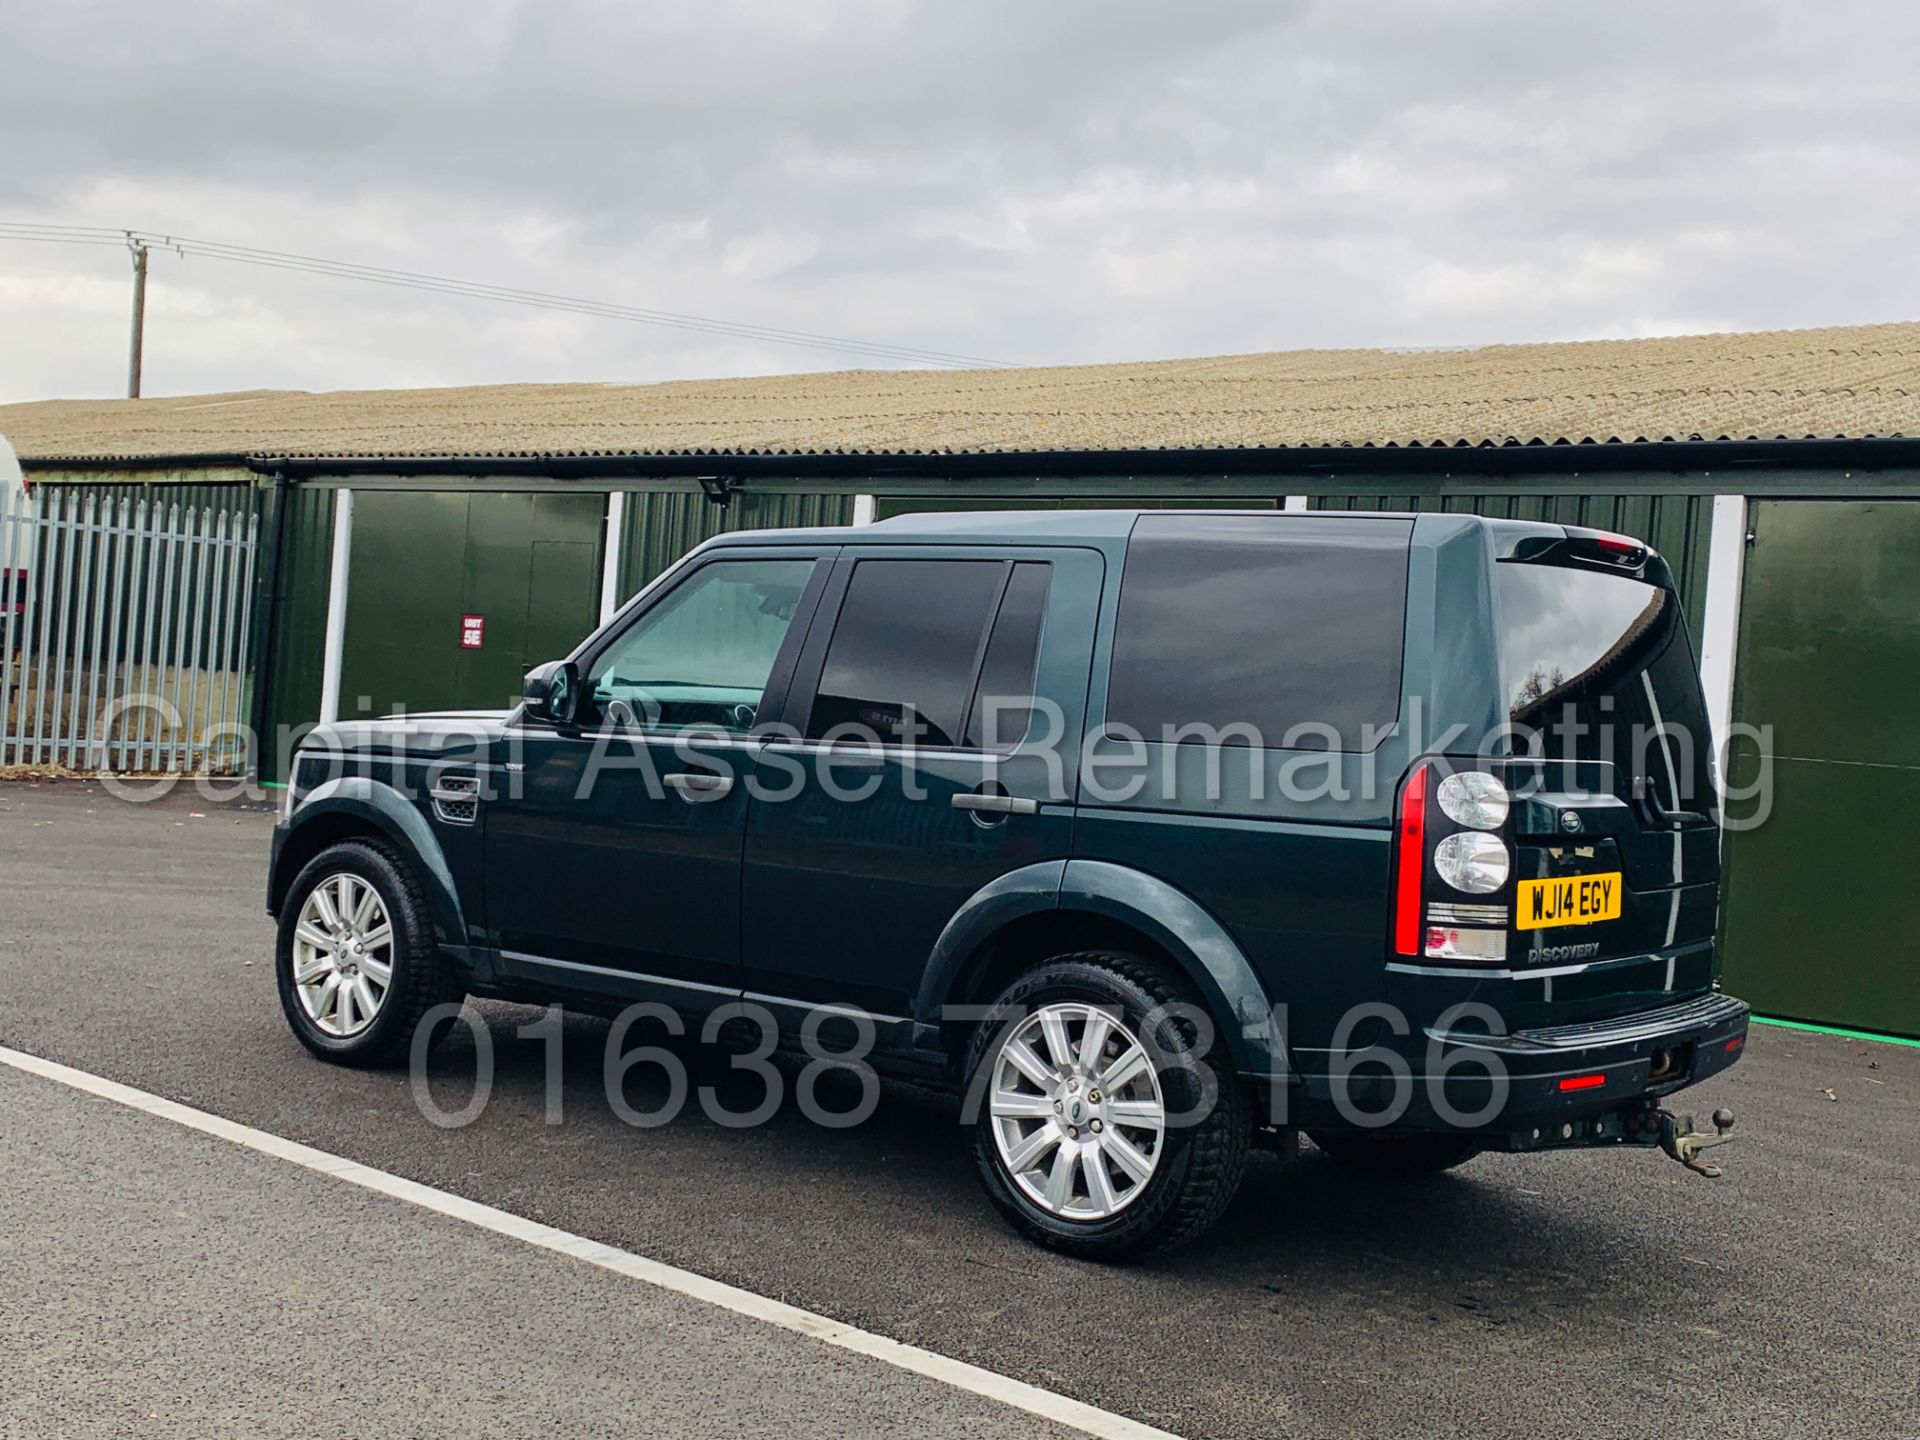 LAND ROVER DISCOVERY 4 *XS EDITION* UTILITY COMMERCIAL (2014) '3.0 SDV6 - 8 SPEED AUTO' *TOP SPEC* - Bild 4 aus 49